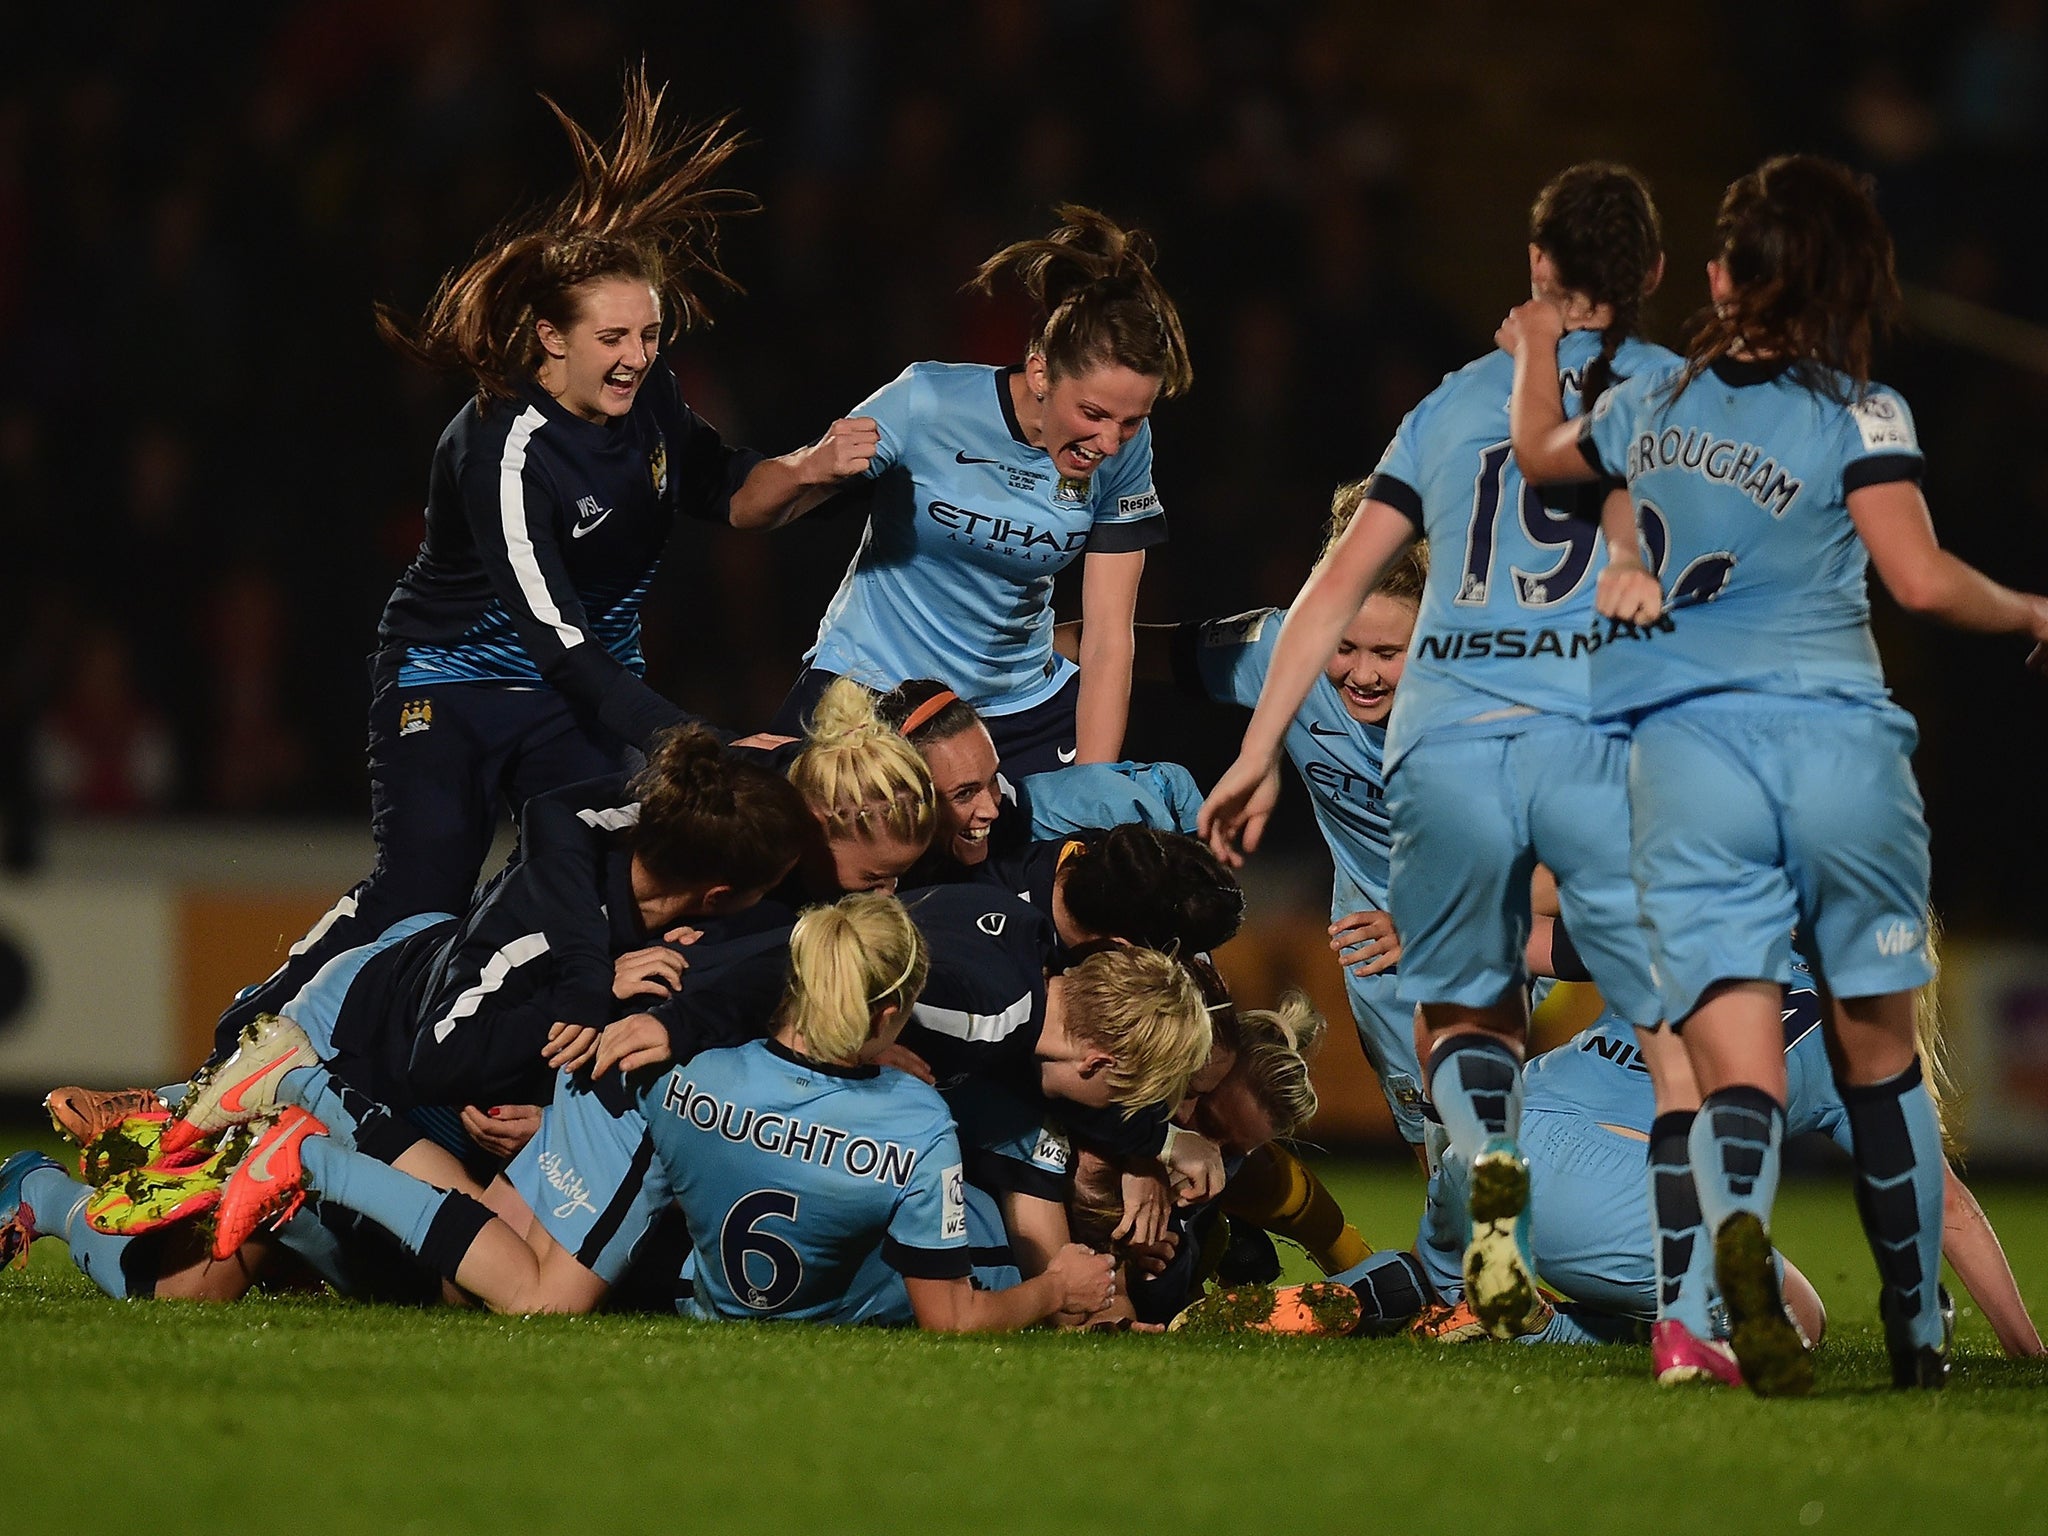 Manchester City’s jubilant players celebrate winning the
Continental Cup last night at Adams Park, High Wycombe